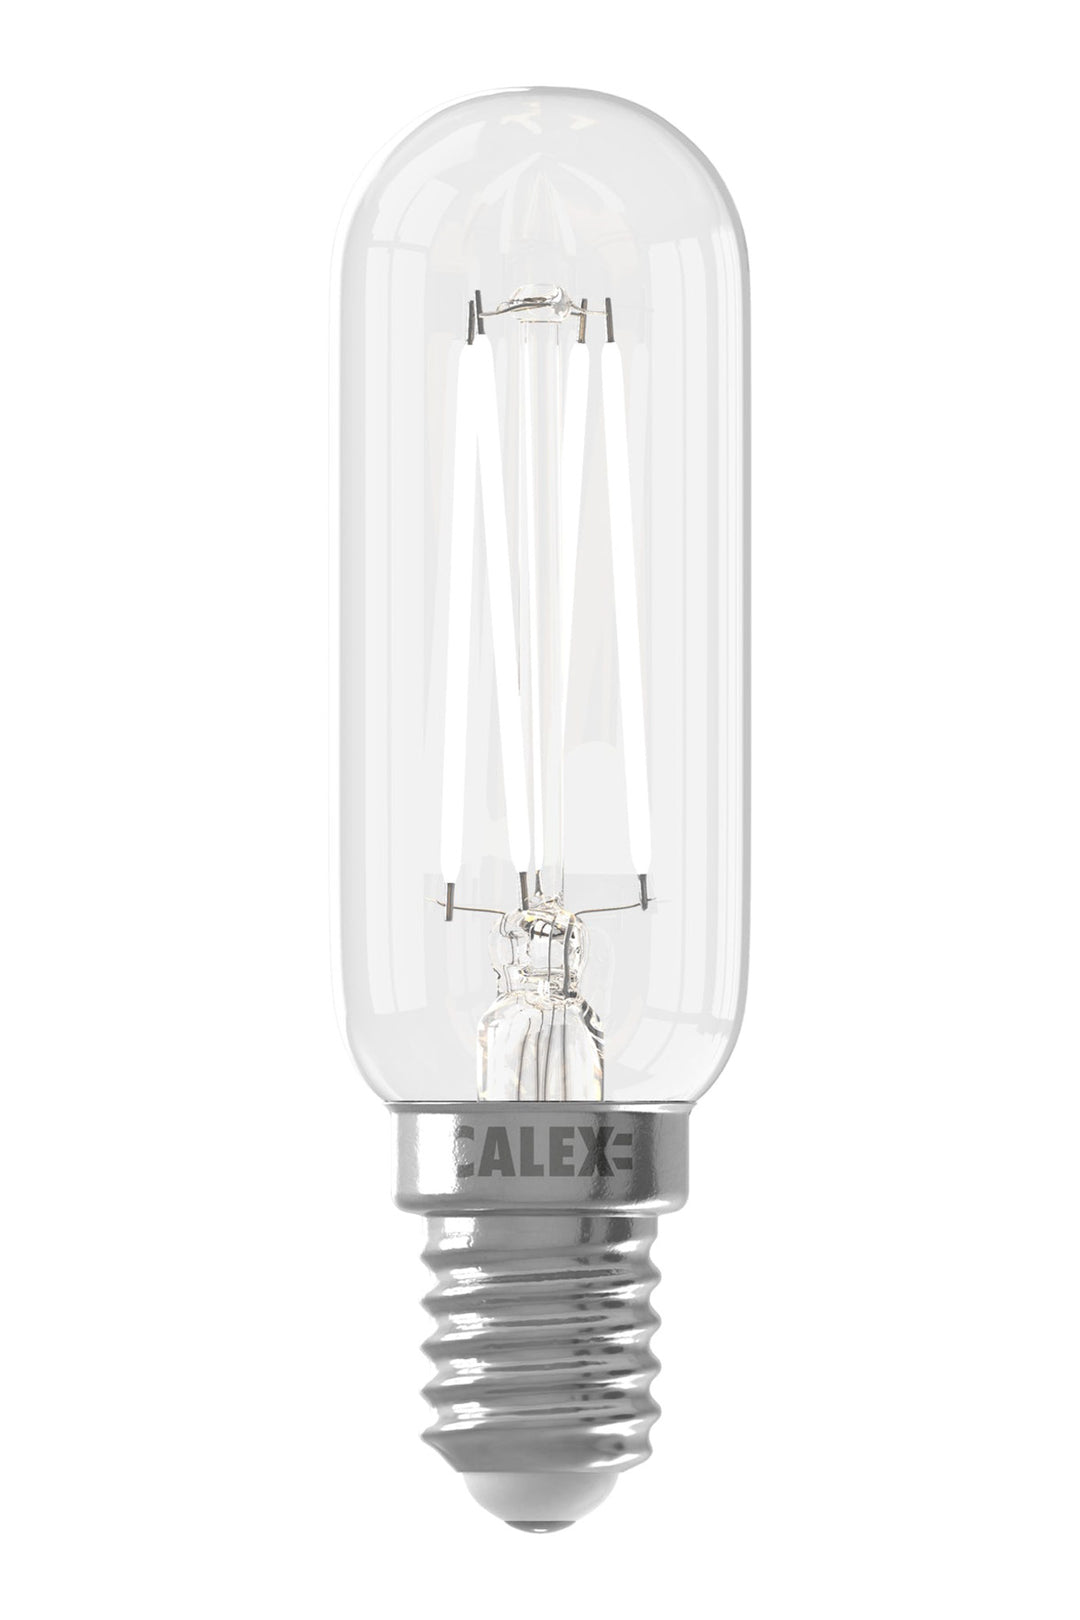 Calex LED Functional Filament Tube Lamp T25x85, Clear, E14, Dimmable 1101003700